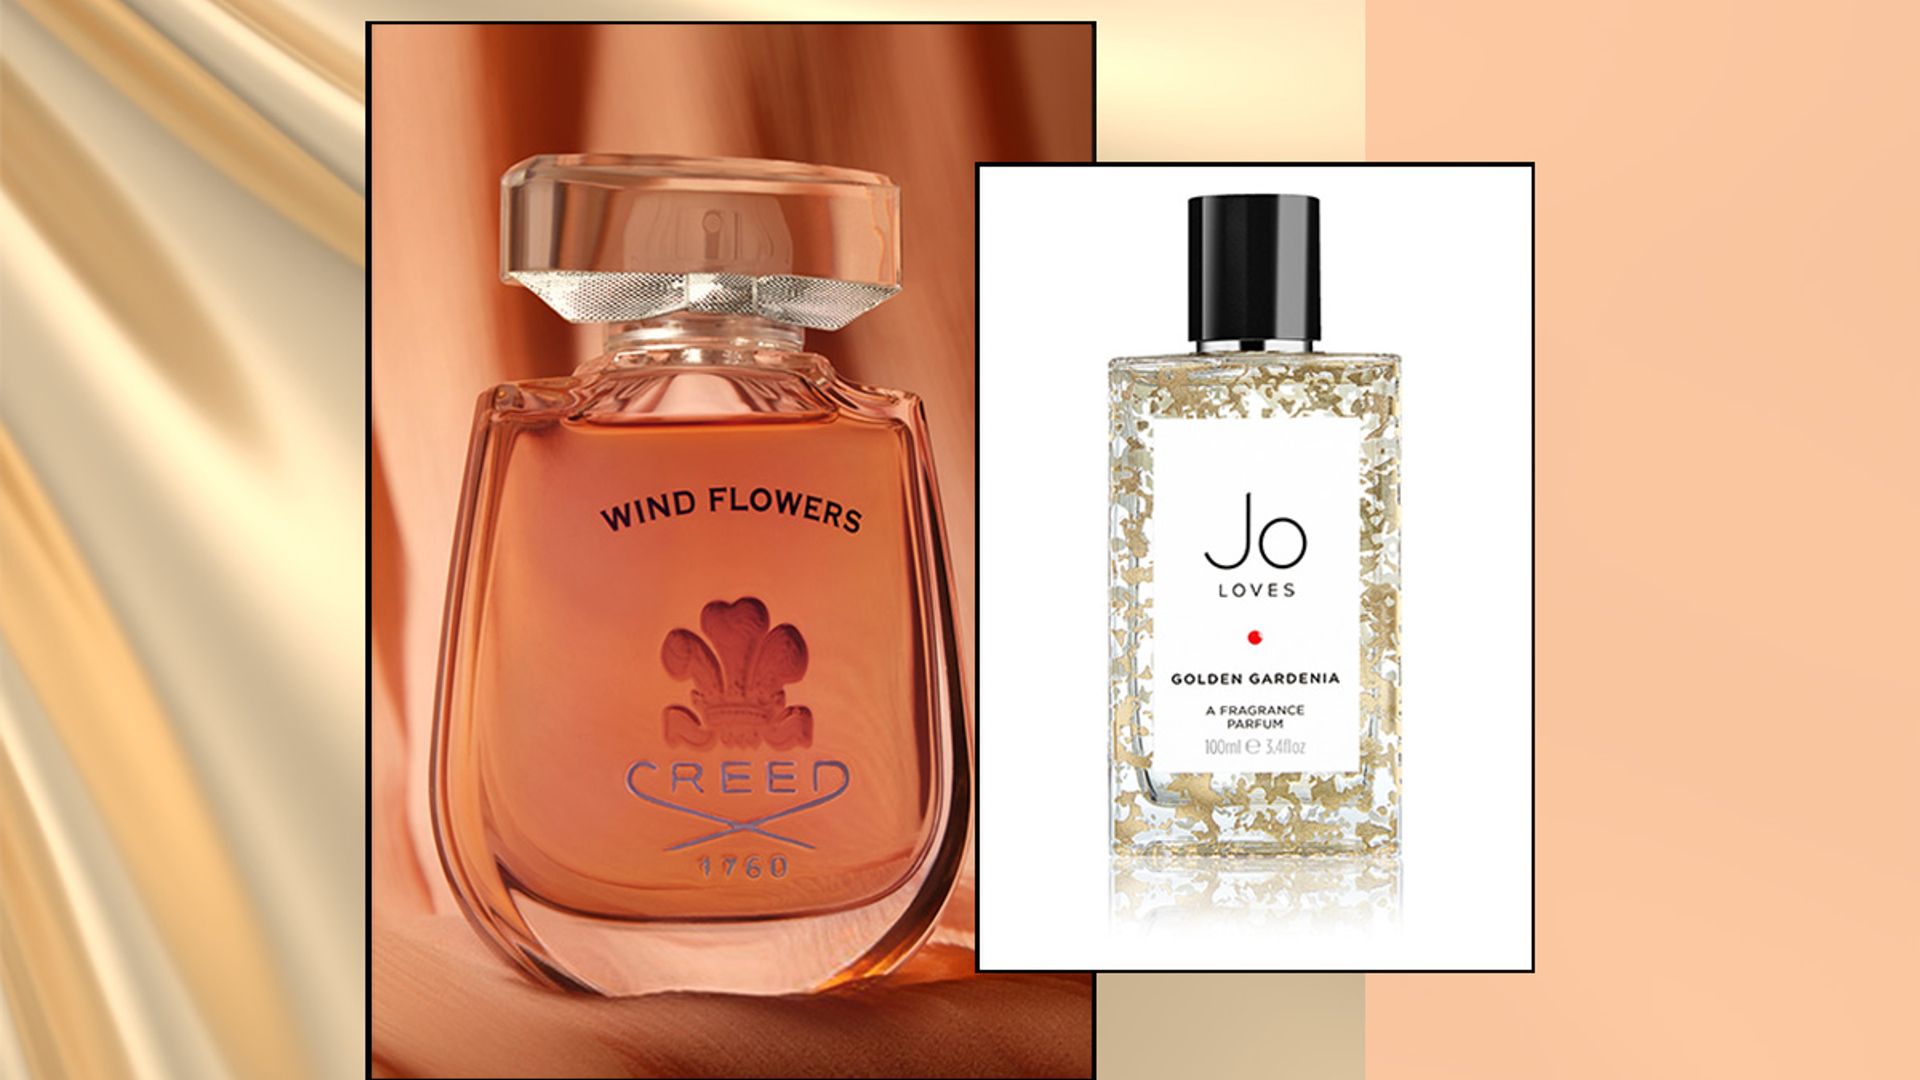 21 best new perfumes for women 2022: The talked about fragrances from Tom Ford, Jo Malone, Estee Lauder & MORE